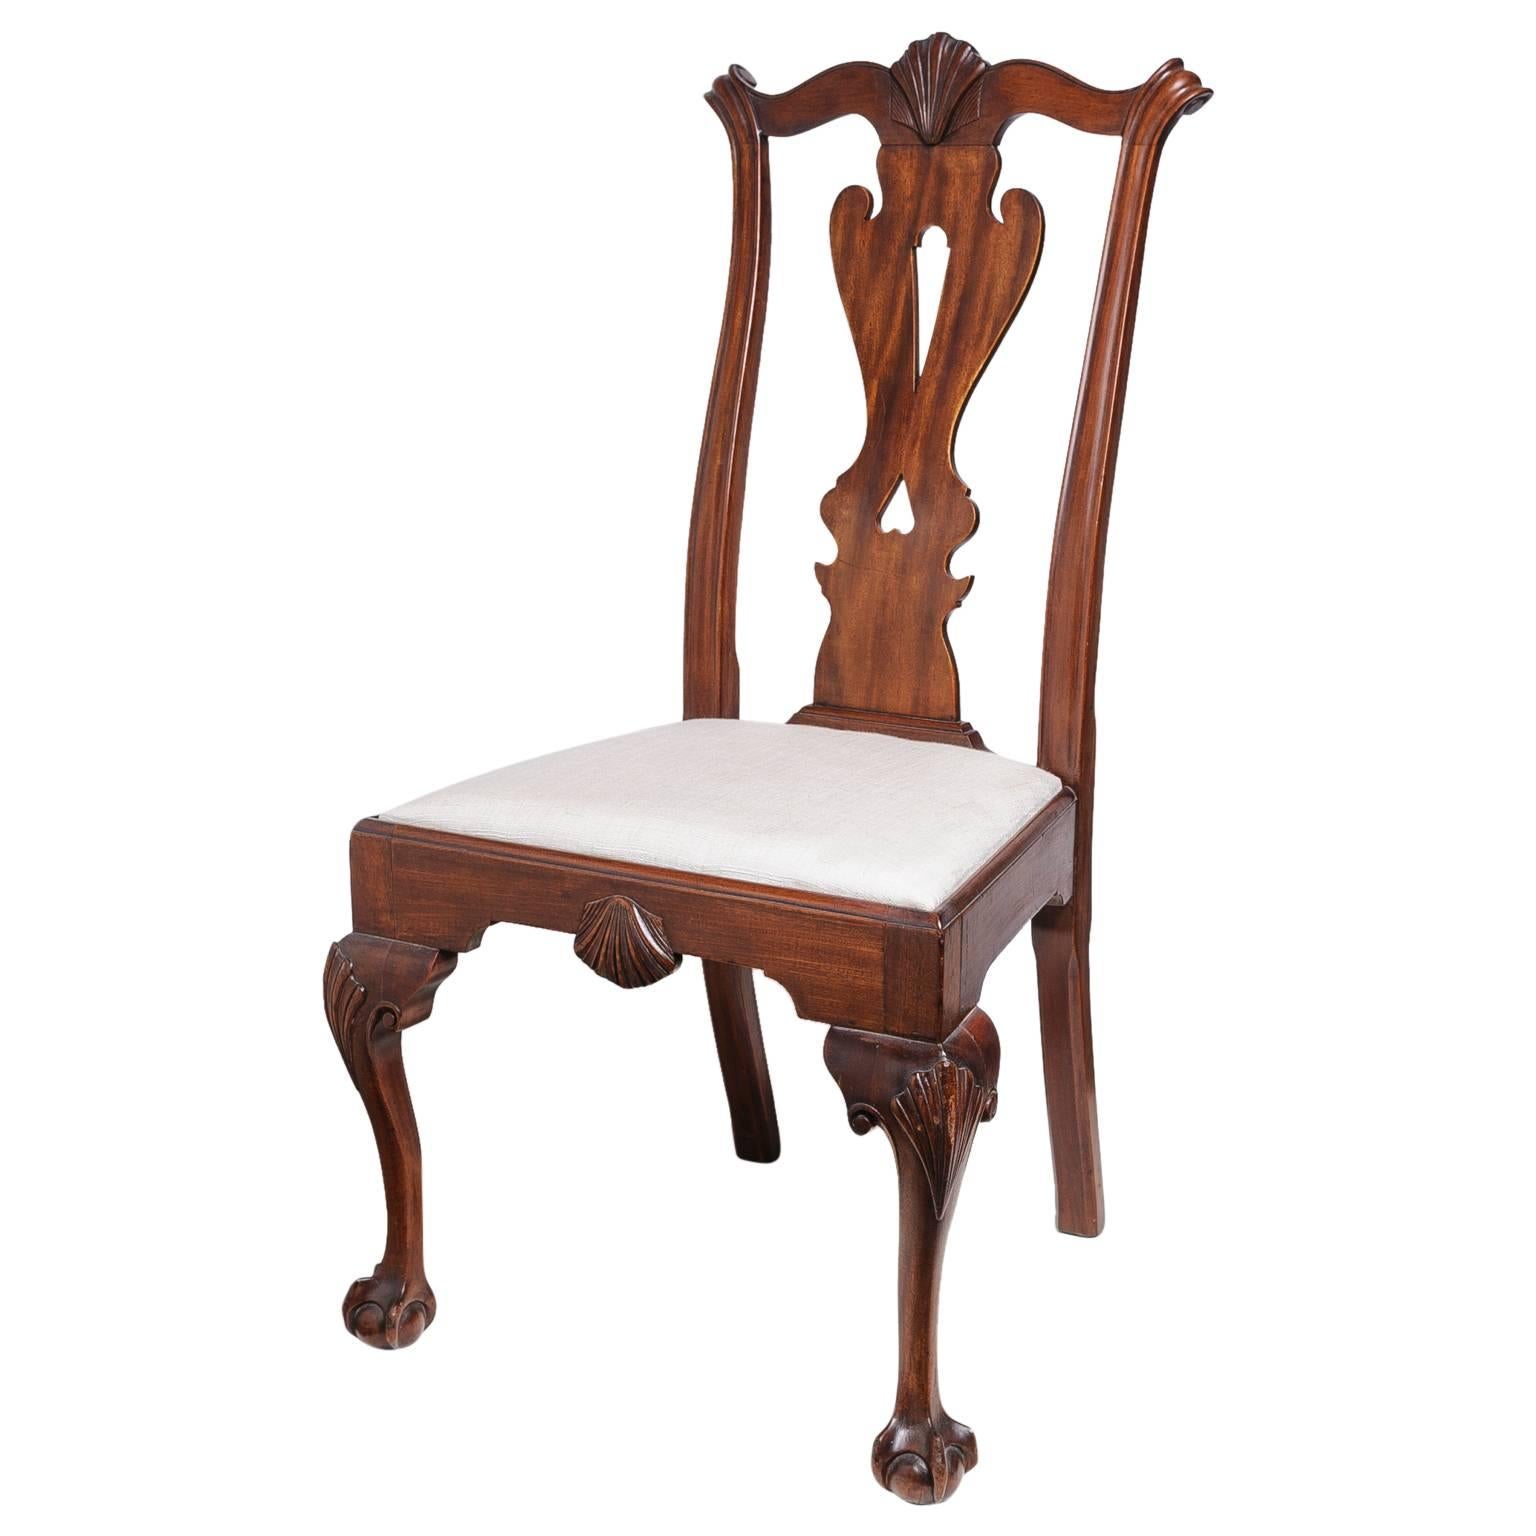 This set of six Thomas Chippendale style dining room chairs are mid-late 19th century copies of an 18th century chair. The wood is mahogany and is hand-carved and joined with details such as the ball and claw foot, cabriolet leg, serpentine crest,